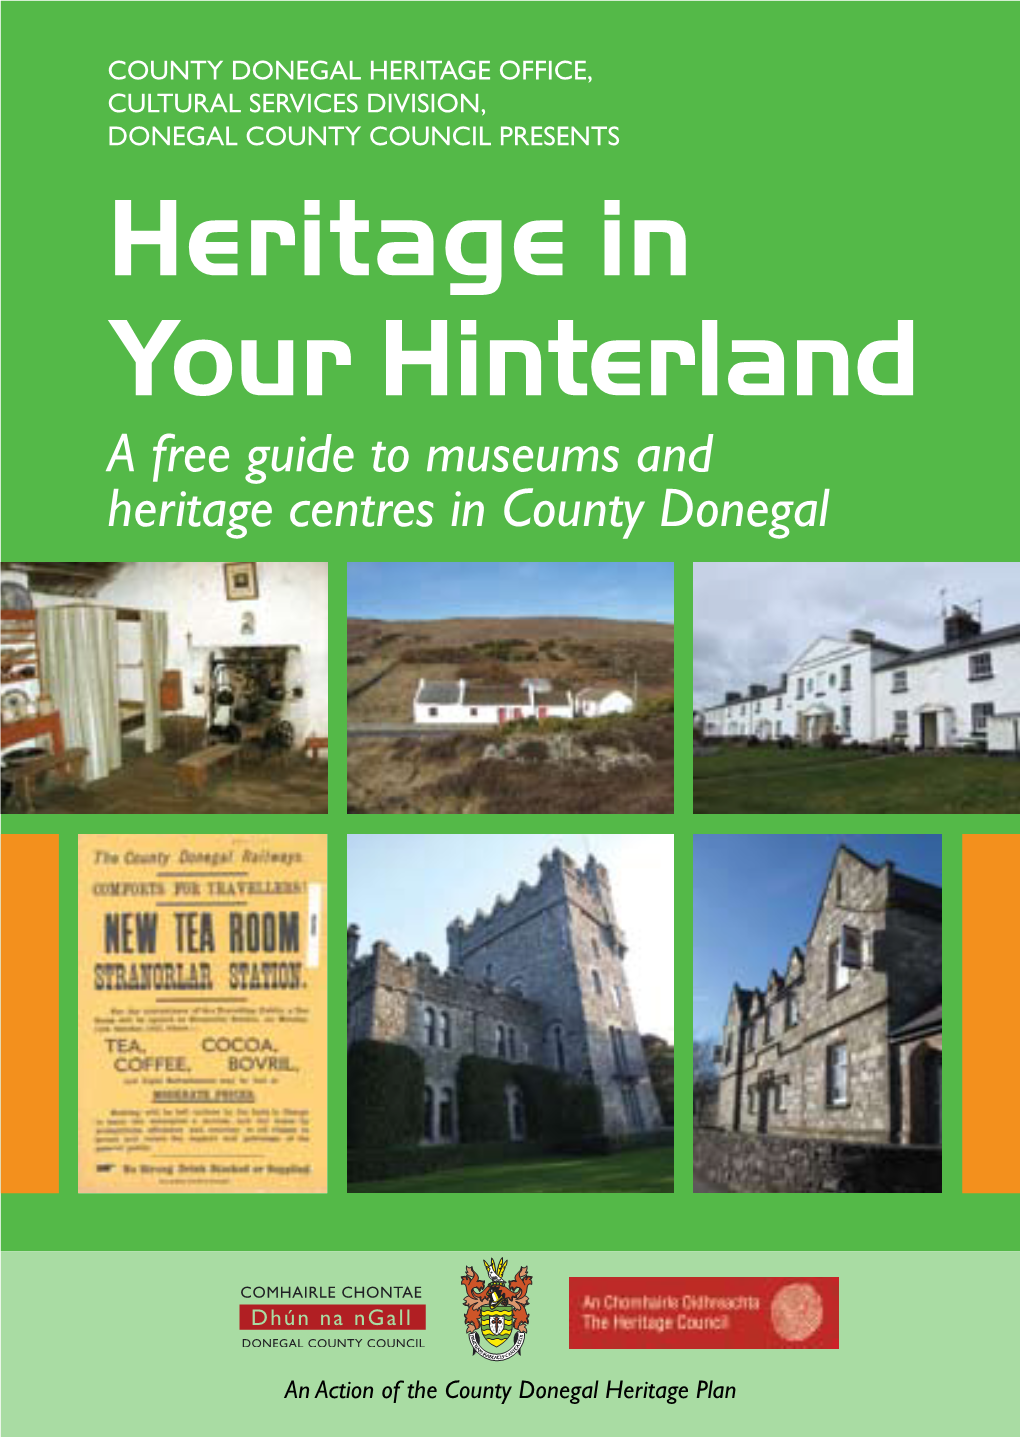 Heritage in Your Hinterland a Free Guide to Museums and Heritage Centres in County Donegal